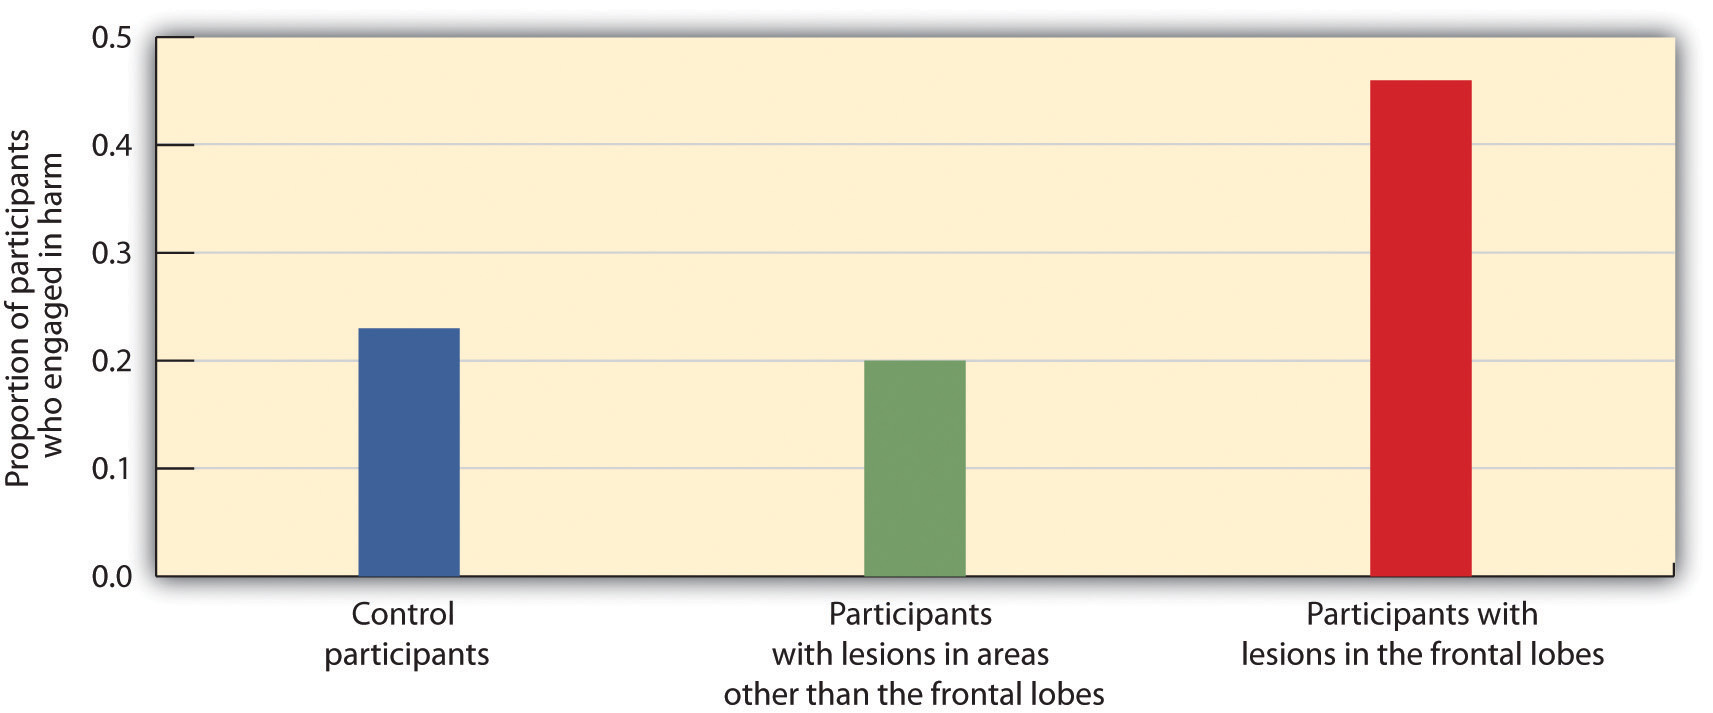 Control participants and participants with lesions in areas other than the frontal lobes have much lower engagements in harm and participants with lesions in the frontal lobes have engage much higher in harm.